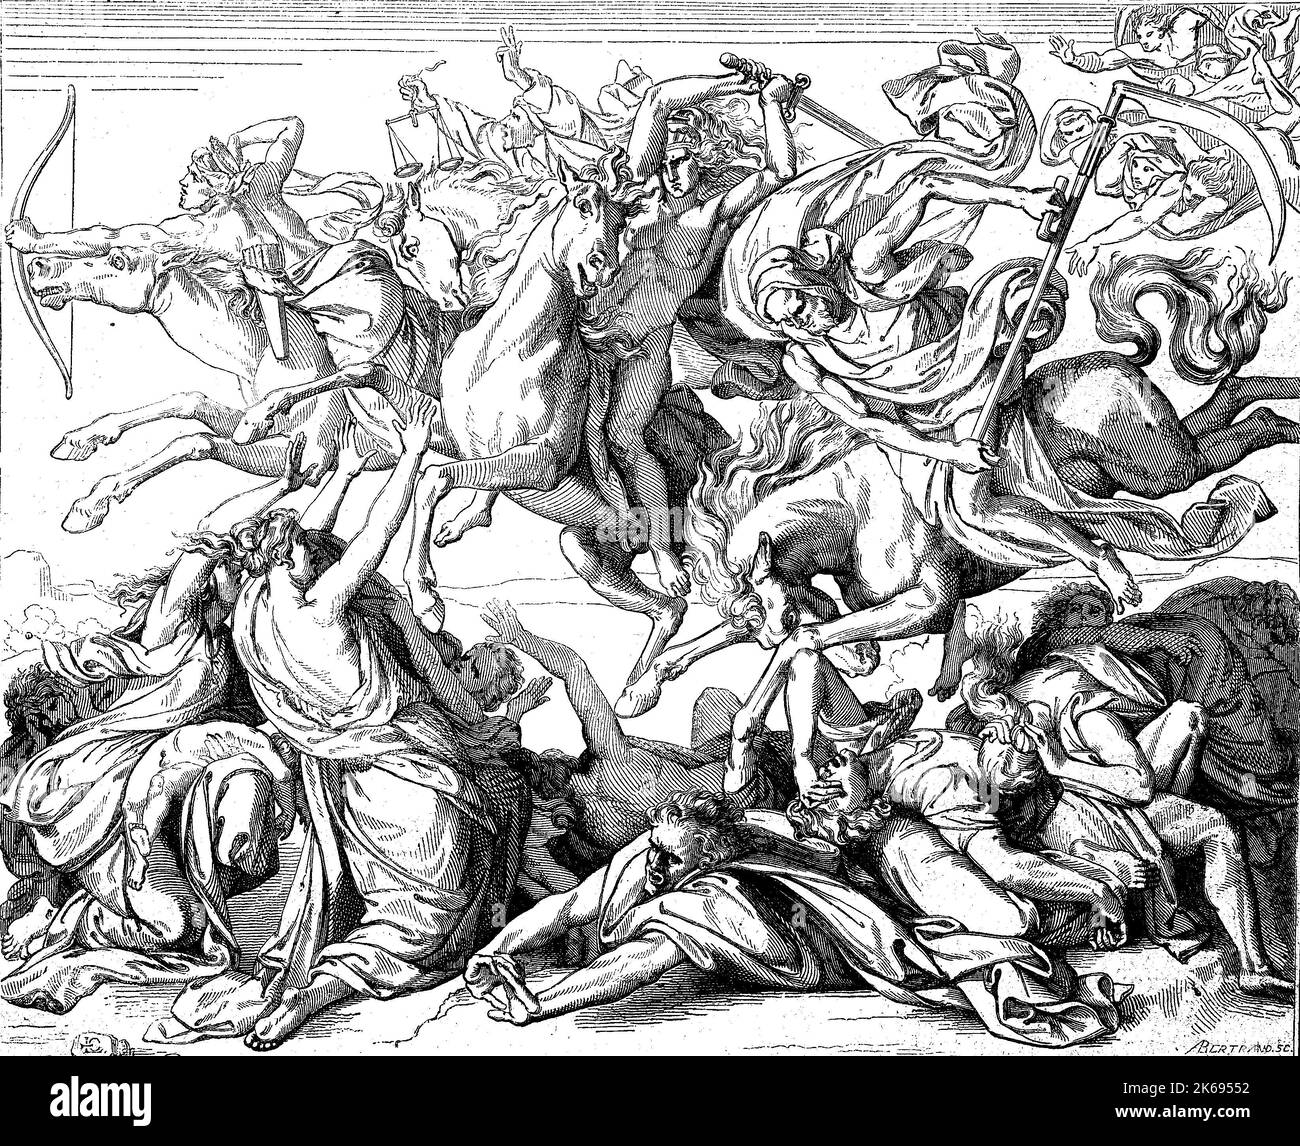 Digital improved reproduction, Four Horsemen of the Apocalypse are described in the last book of the New Testament of the Bible, the Book of Revelation by John of Patmos, original woodprint from th 19th century Stock Photo